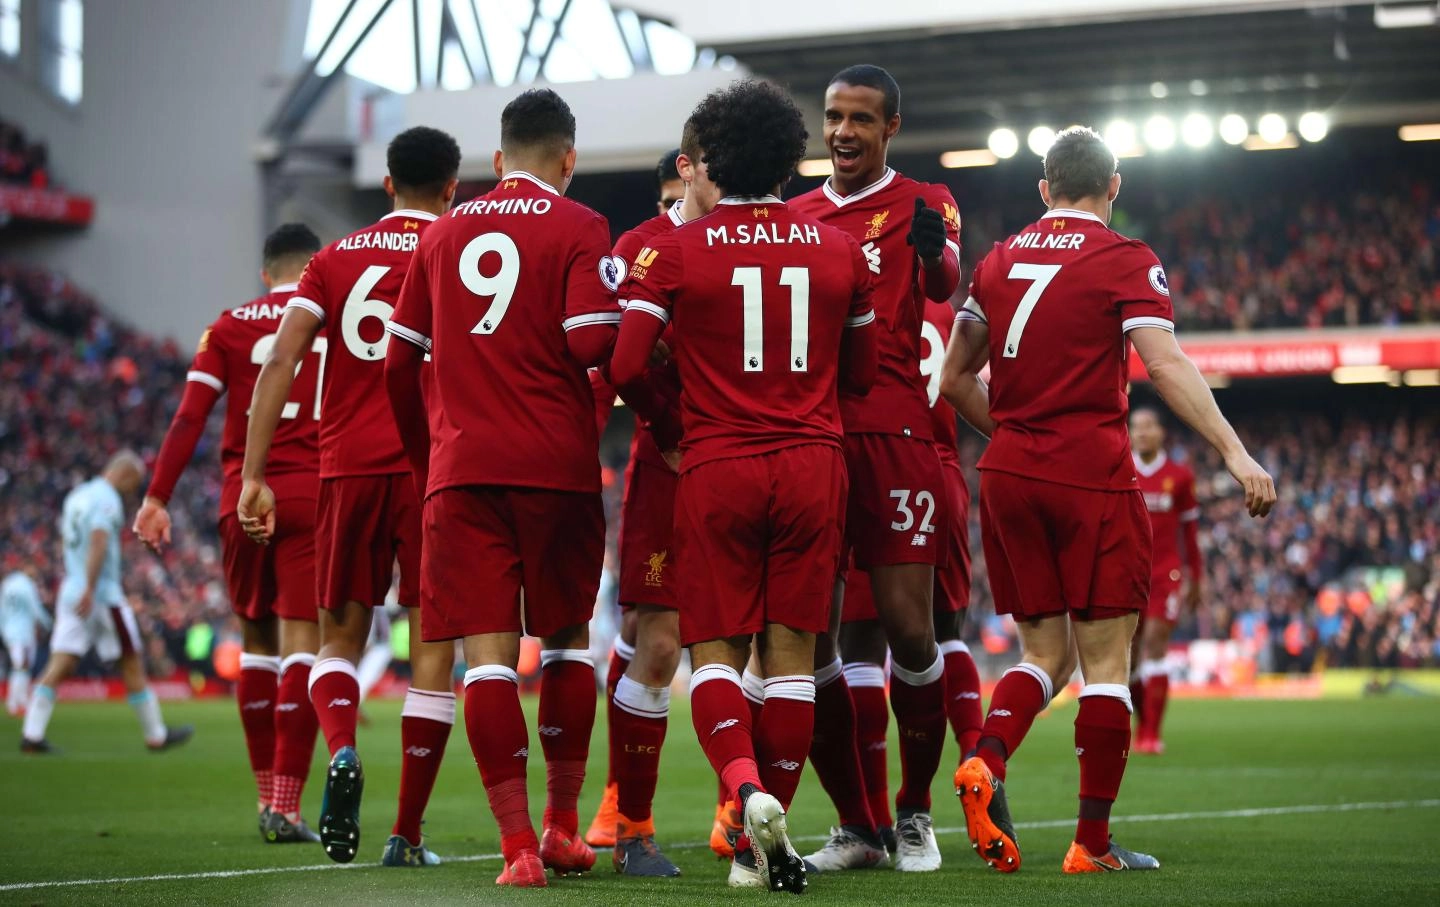 February 2018: Celebrating at Anfield